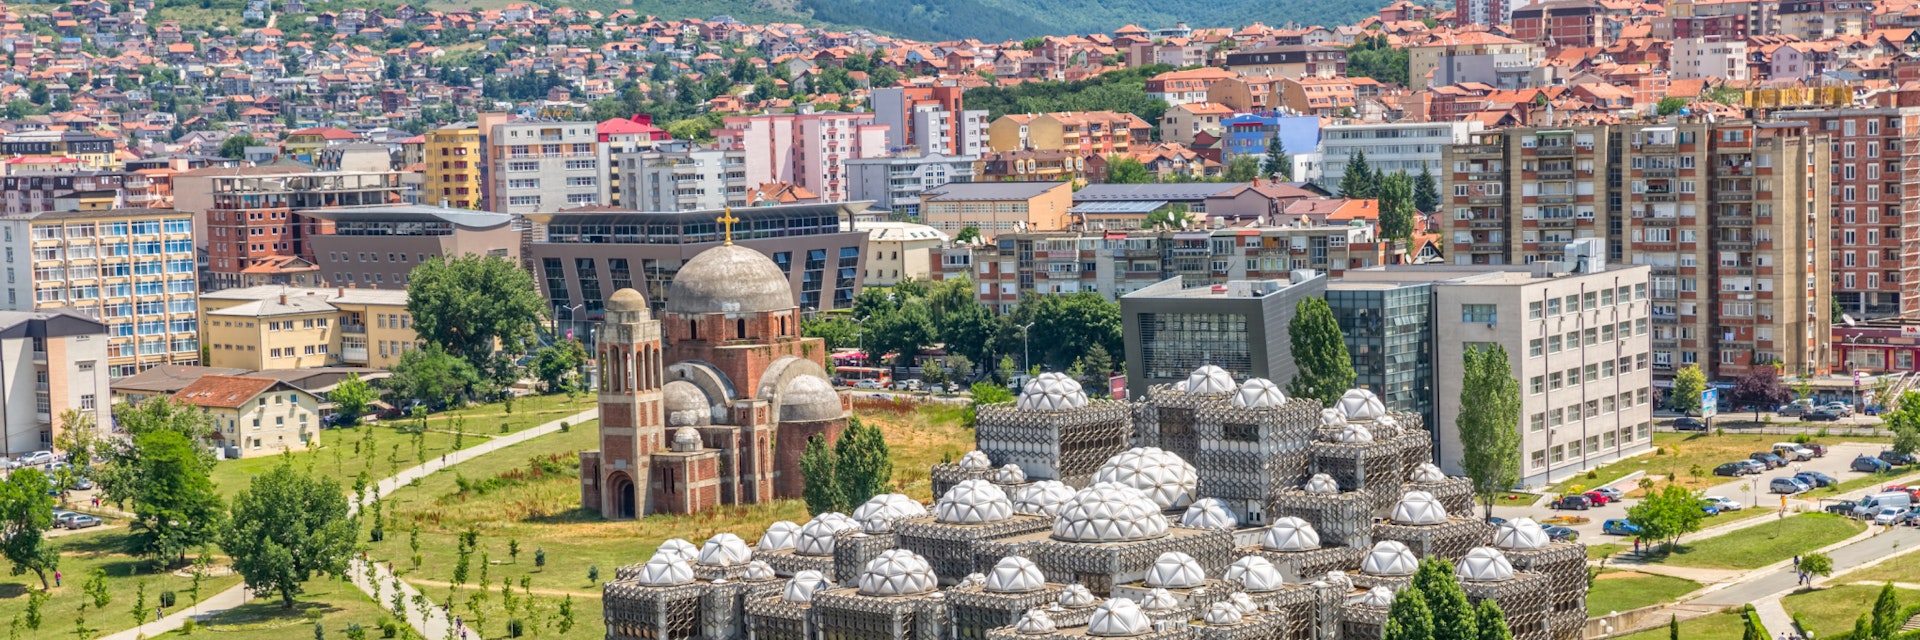 PRISTINA, KOSOVO - JULY 01, 2015: Aerial view of capital city with some old buildings like National Public Library and Christ the Saviour Cathedral.; Shutterstock ID 311334992; Your name (First / Last): Brana V; GL account no.: 65050; Netsuite department name: Online Editorial; Full Product or Project name including edition: Kosovo BiE 2018